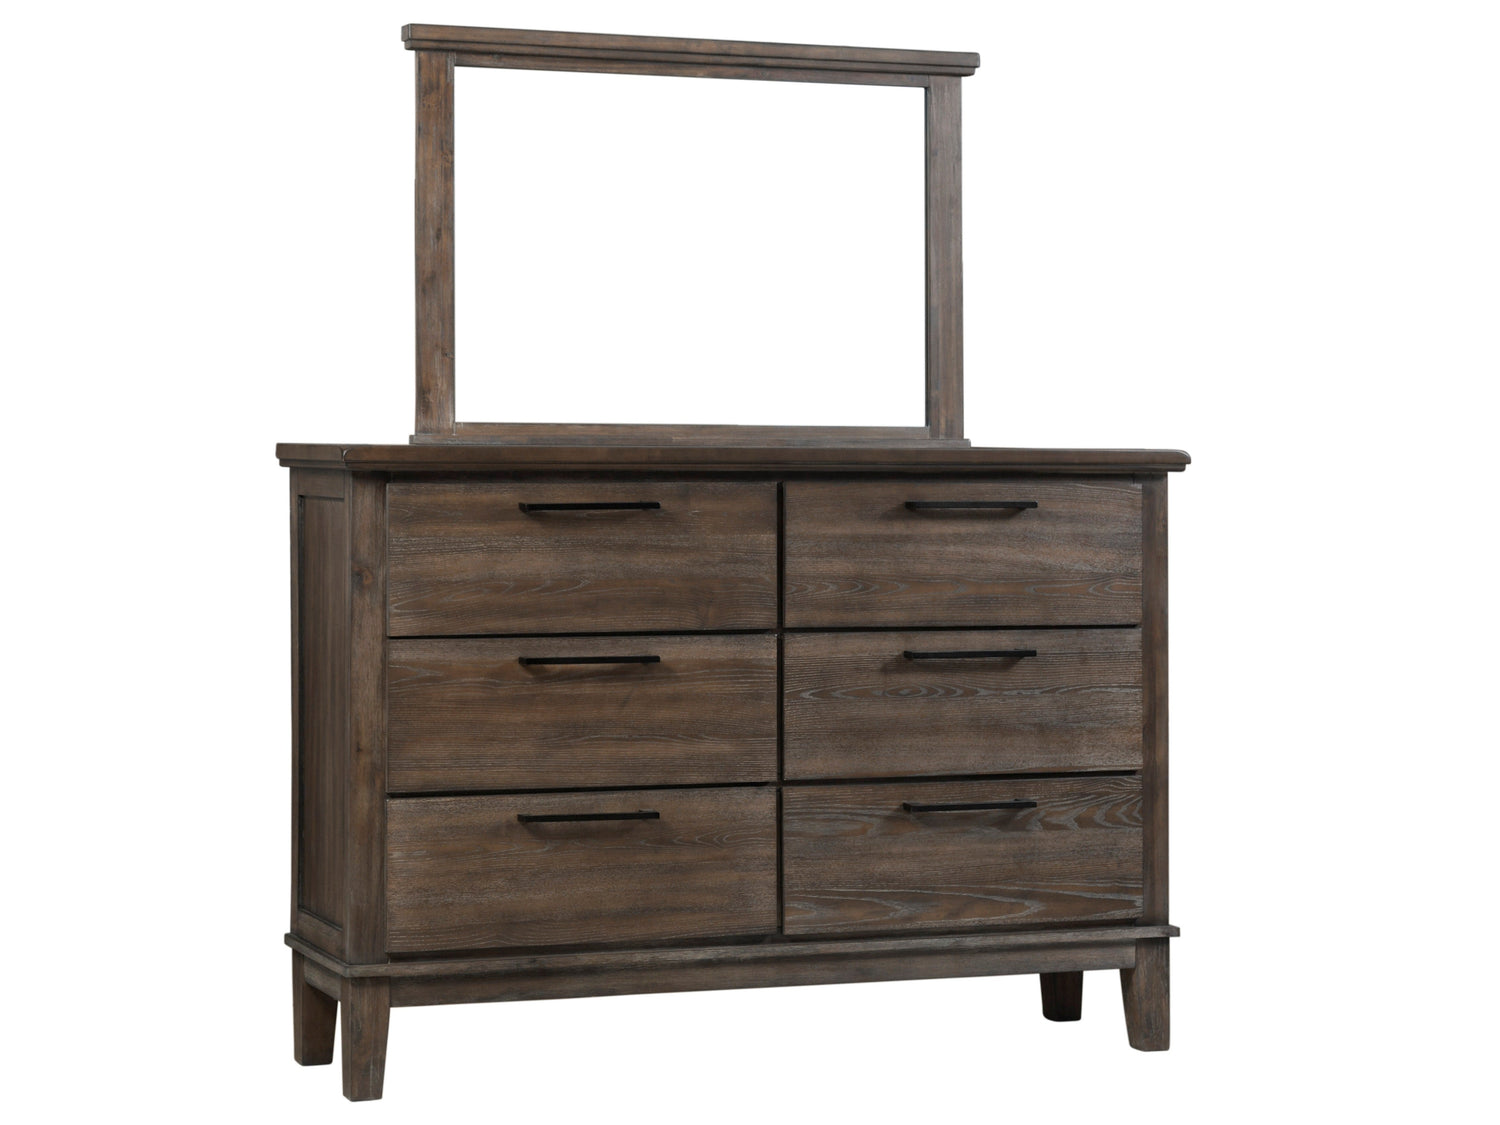 Watson Gray Upholstered Storage Panel Bedroom Set - SET | SH2213GRYK-1 | SH2213GRYK-2 | SH2213GRY-3 | SH2213GRY-5 | SH2213GRY-6 | SH2213GRY-4 | SH2213GRY-9 - Bien Home Furniture &amp; Electronics